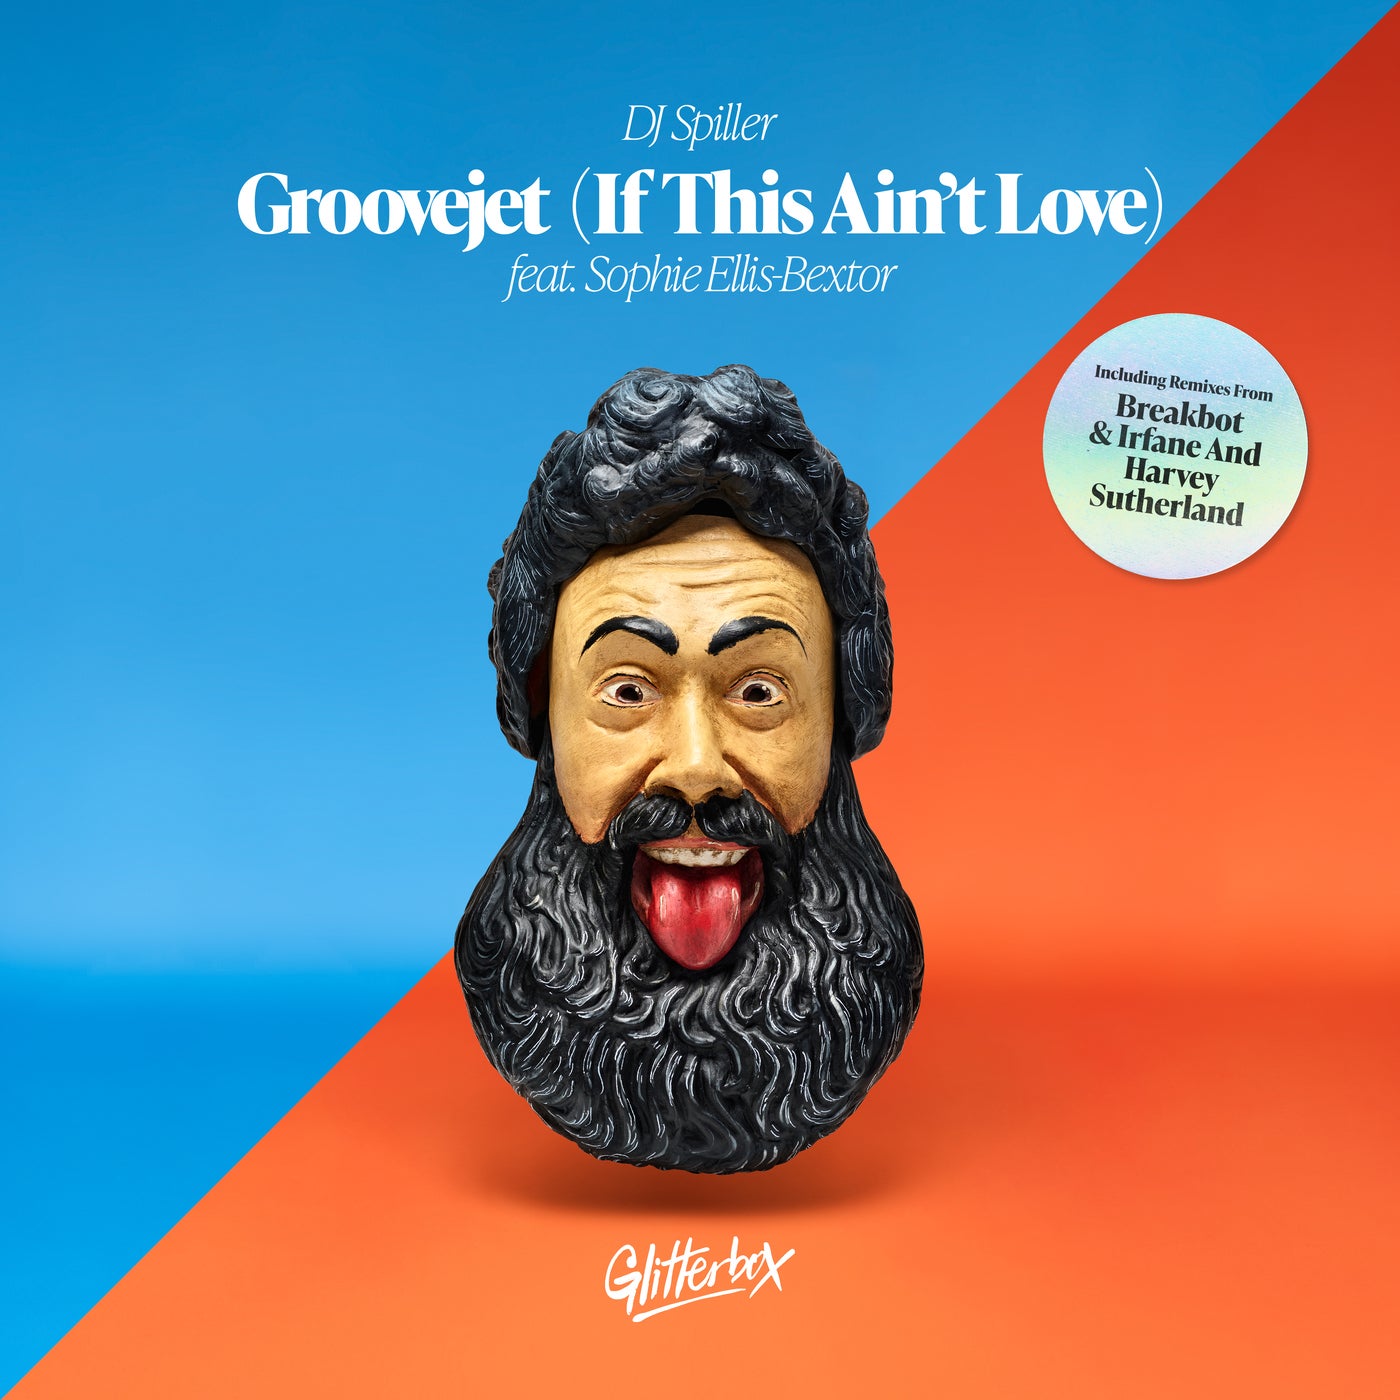 Groovejet (If This Ain't Love) - Remixes